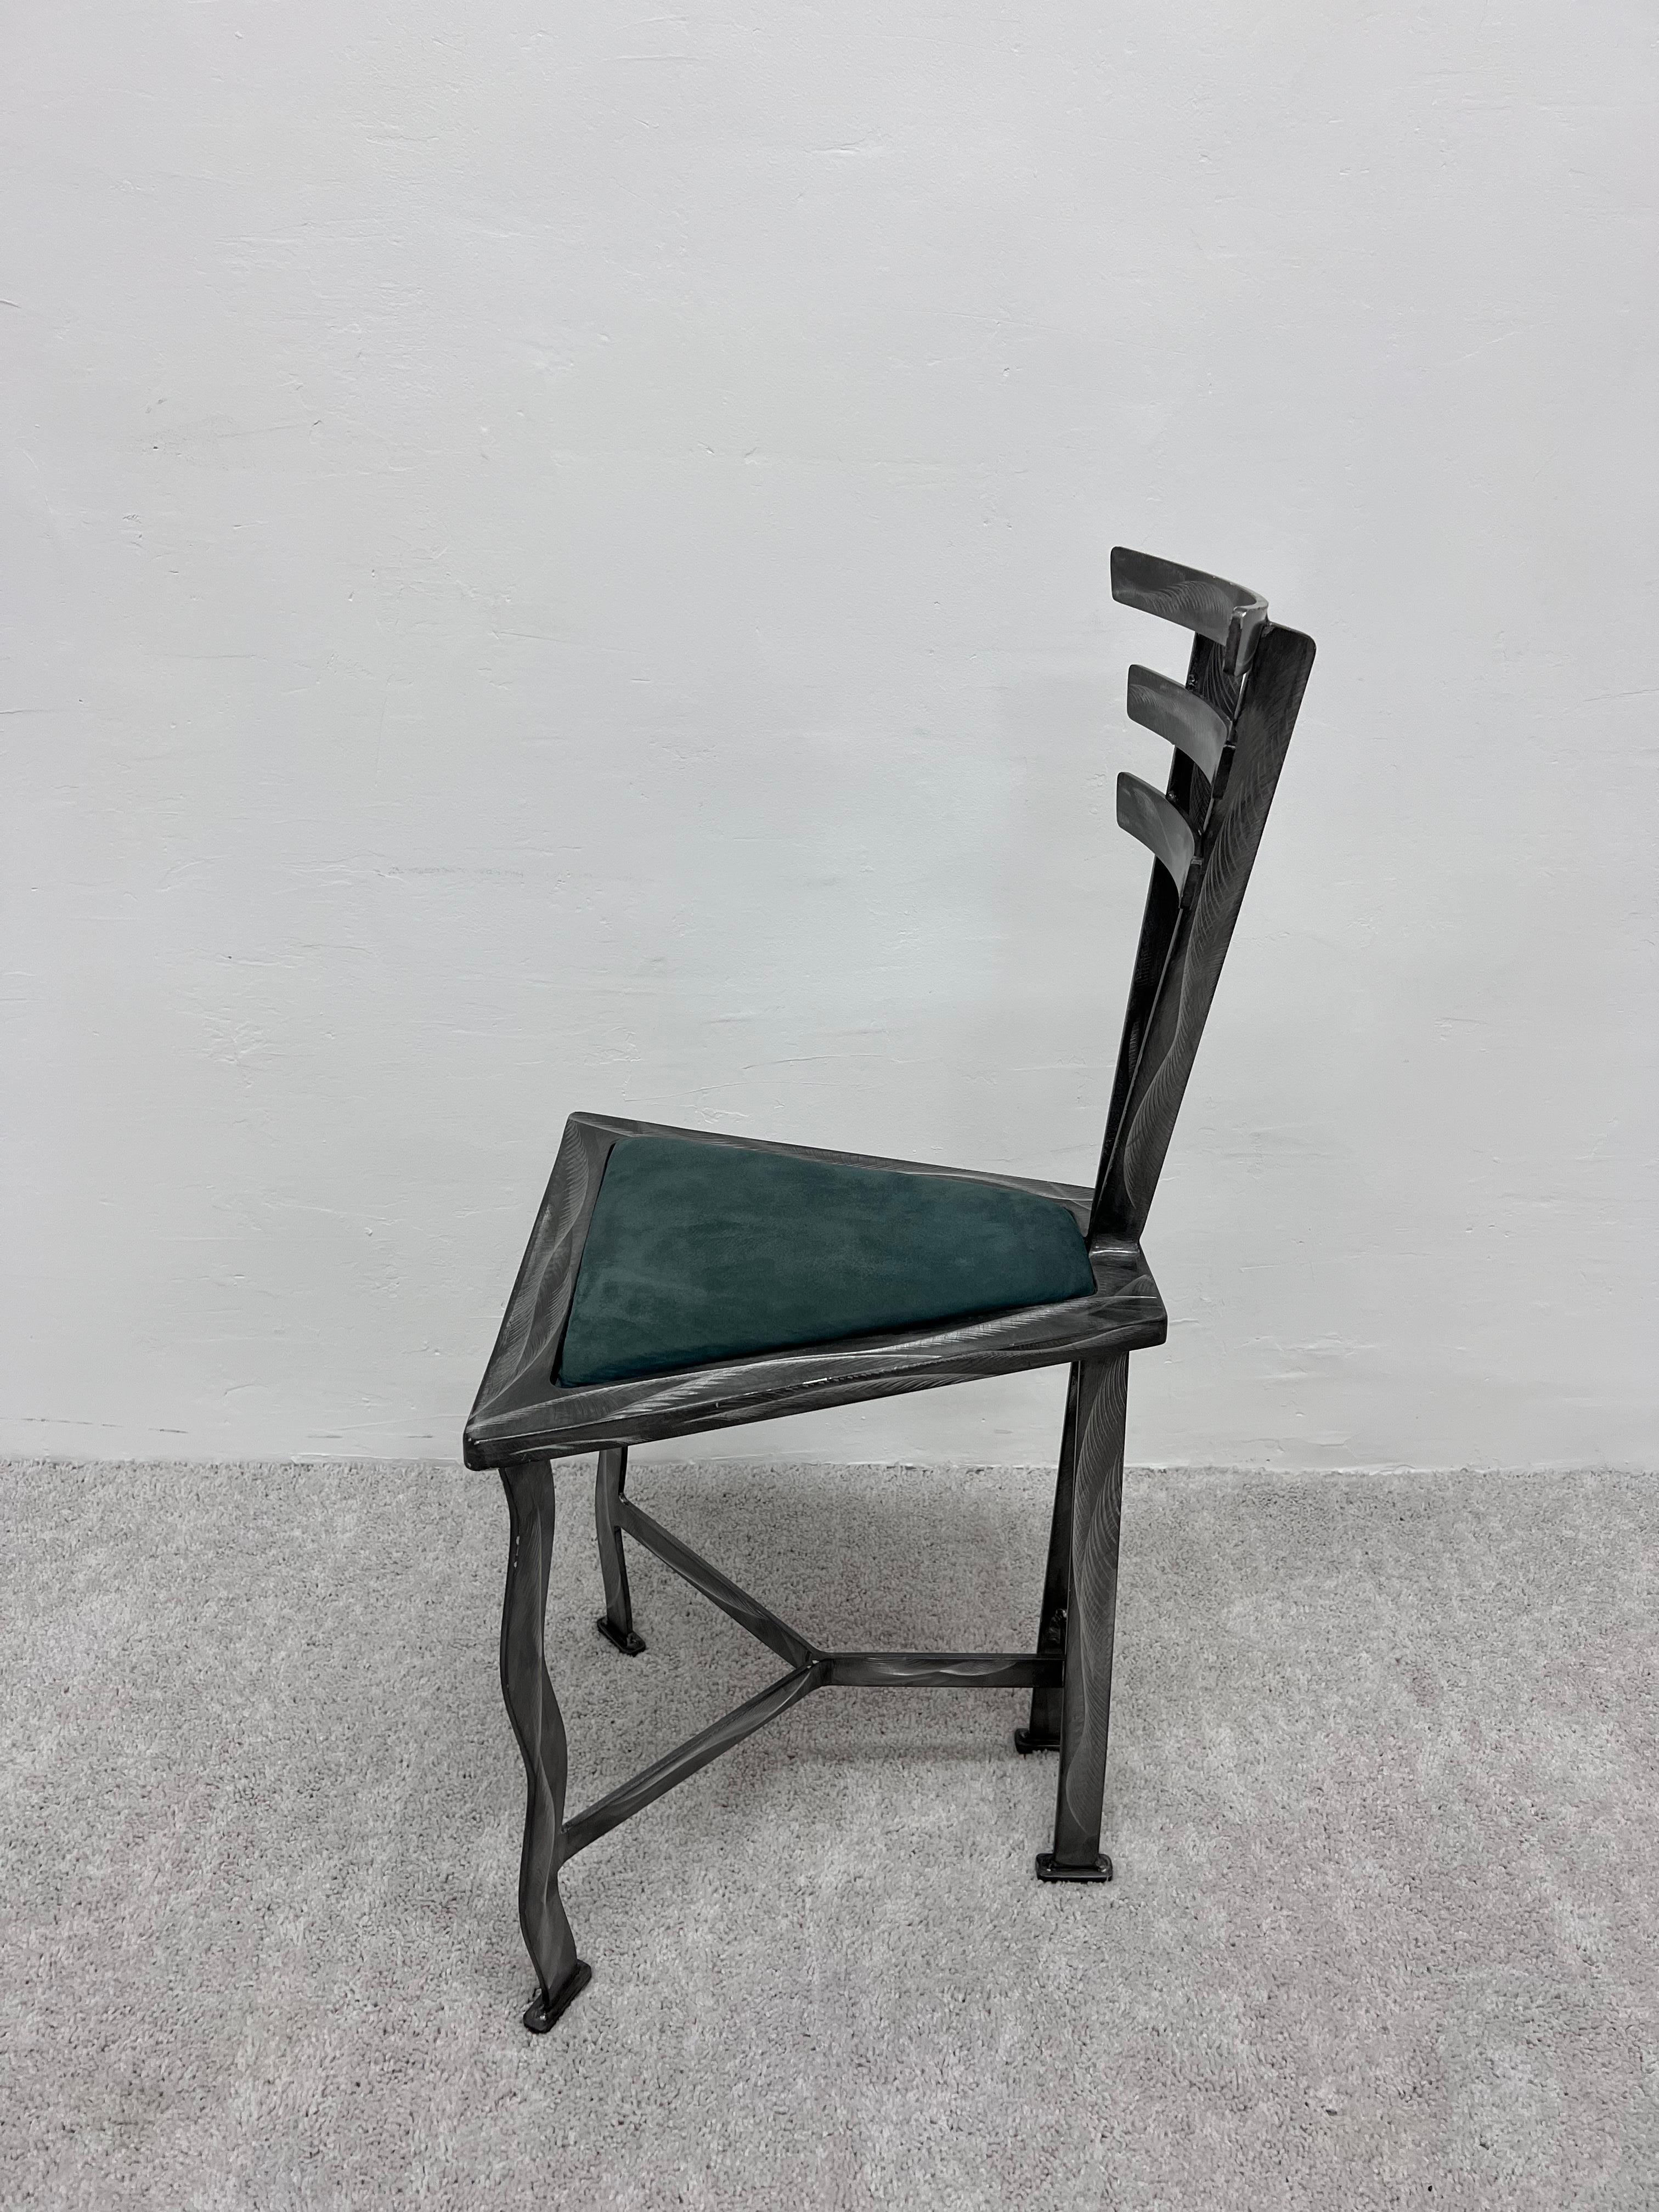 90s Postmodern Contemporary Welded Steel Studio Side Chairs, a Pair For Sale 1